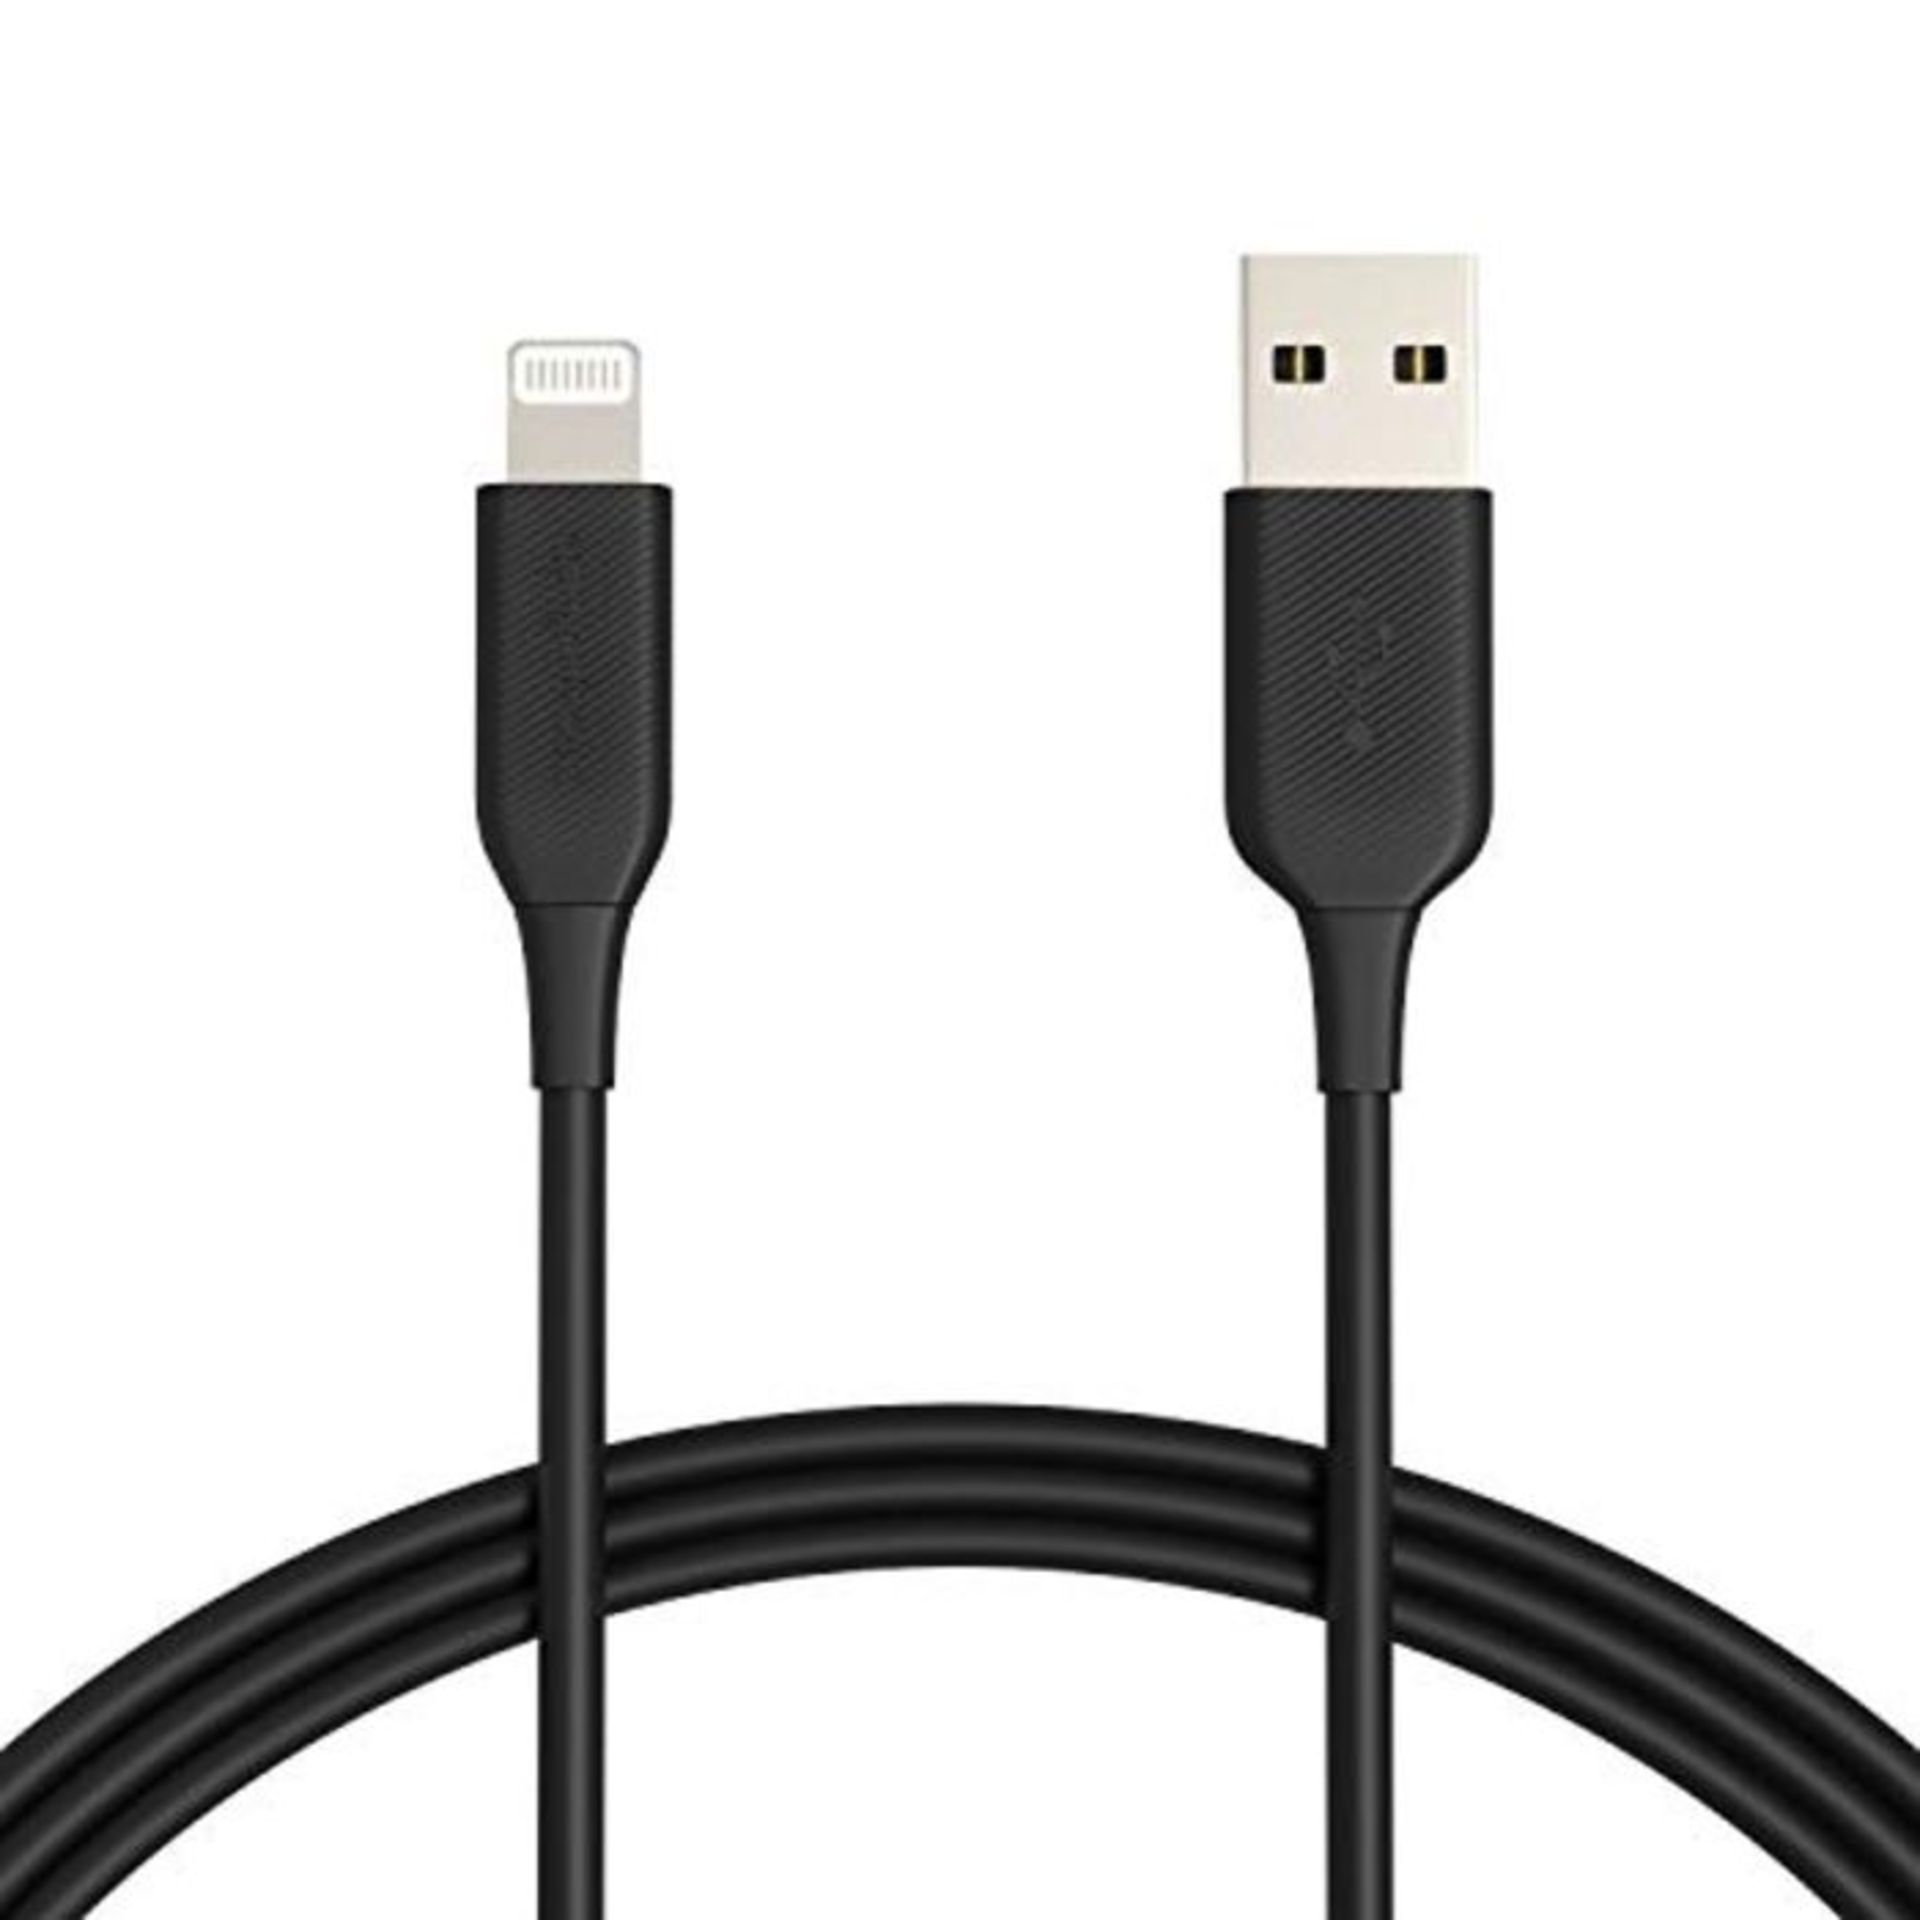 Amazon Basics Lightning to USB A Cable - MFi Certified iPhone Charger, Black, 183 cm